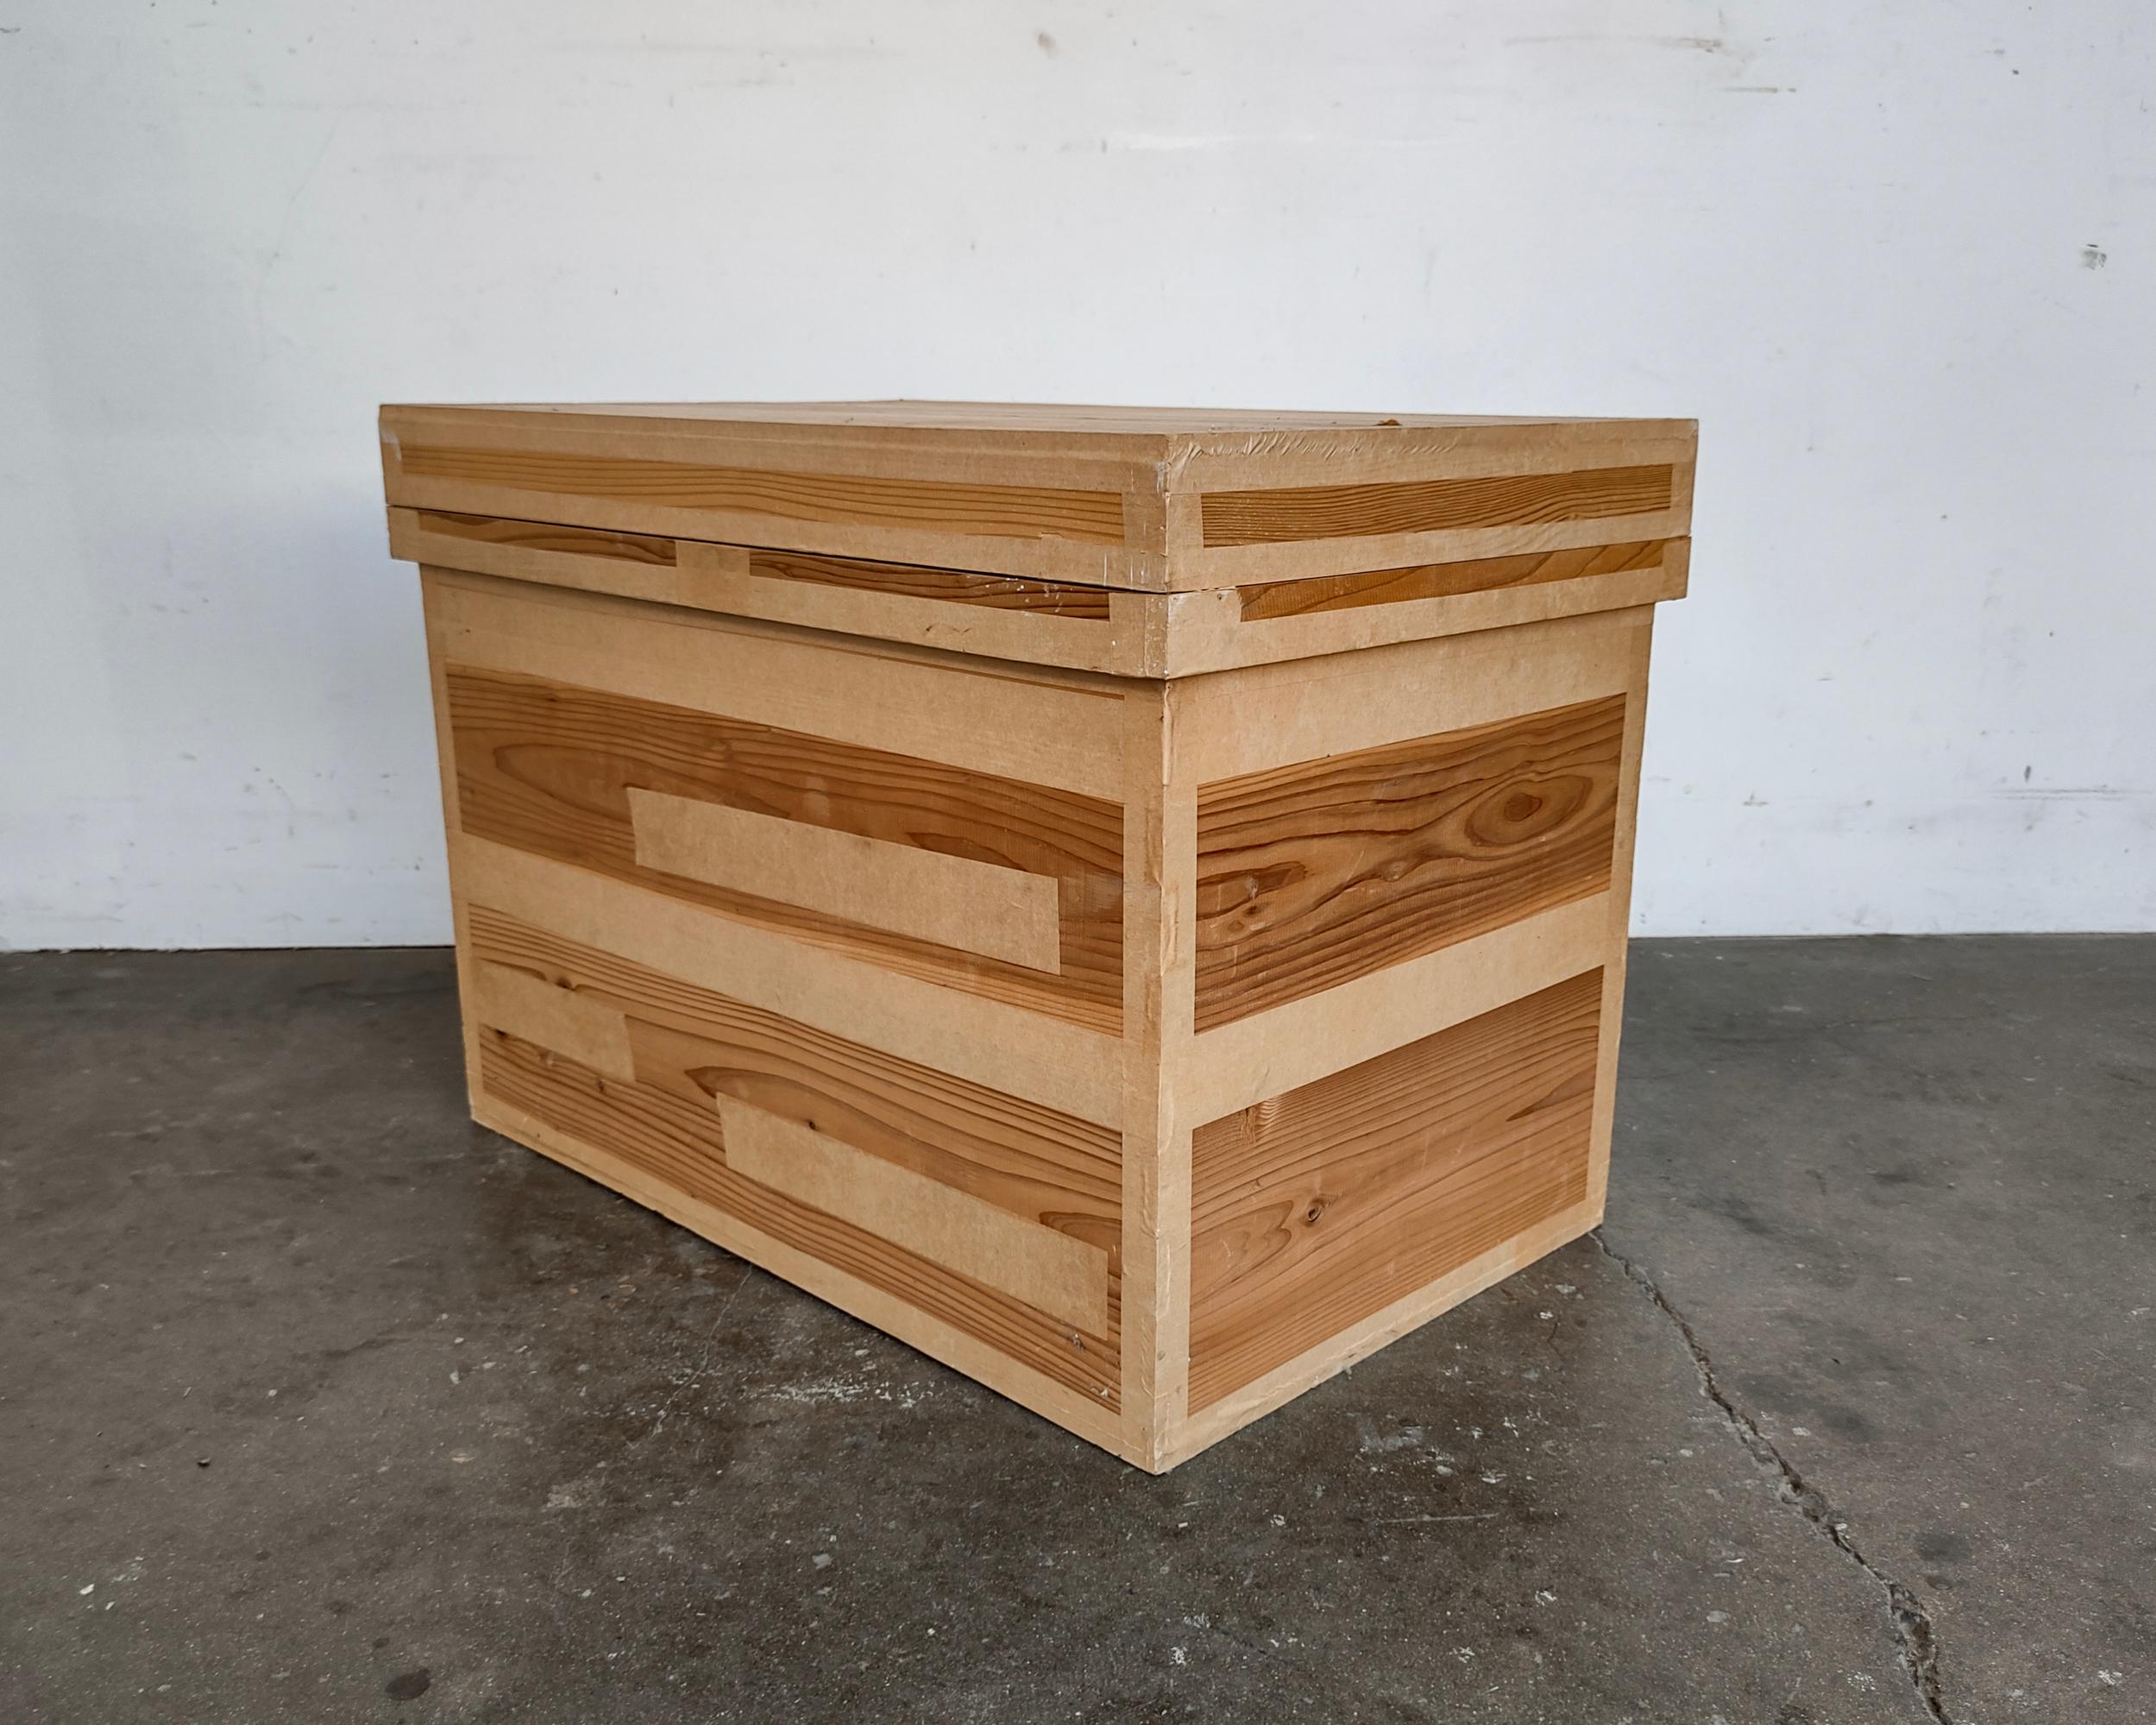 Vintage Japanese cedar wood tea shipping crate circa 1960s. Plain exterior, interior lined with metal. Overall excellent condition considering age - minor wear and tear throughout.

16.75